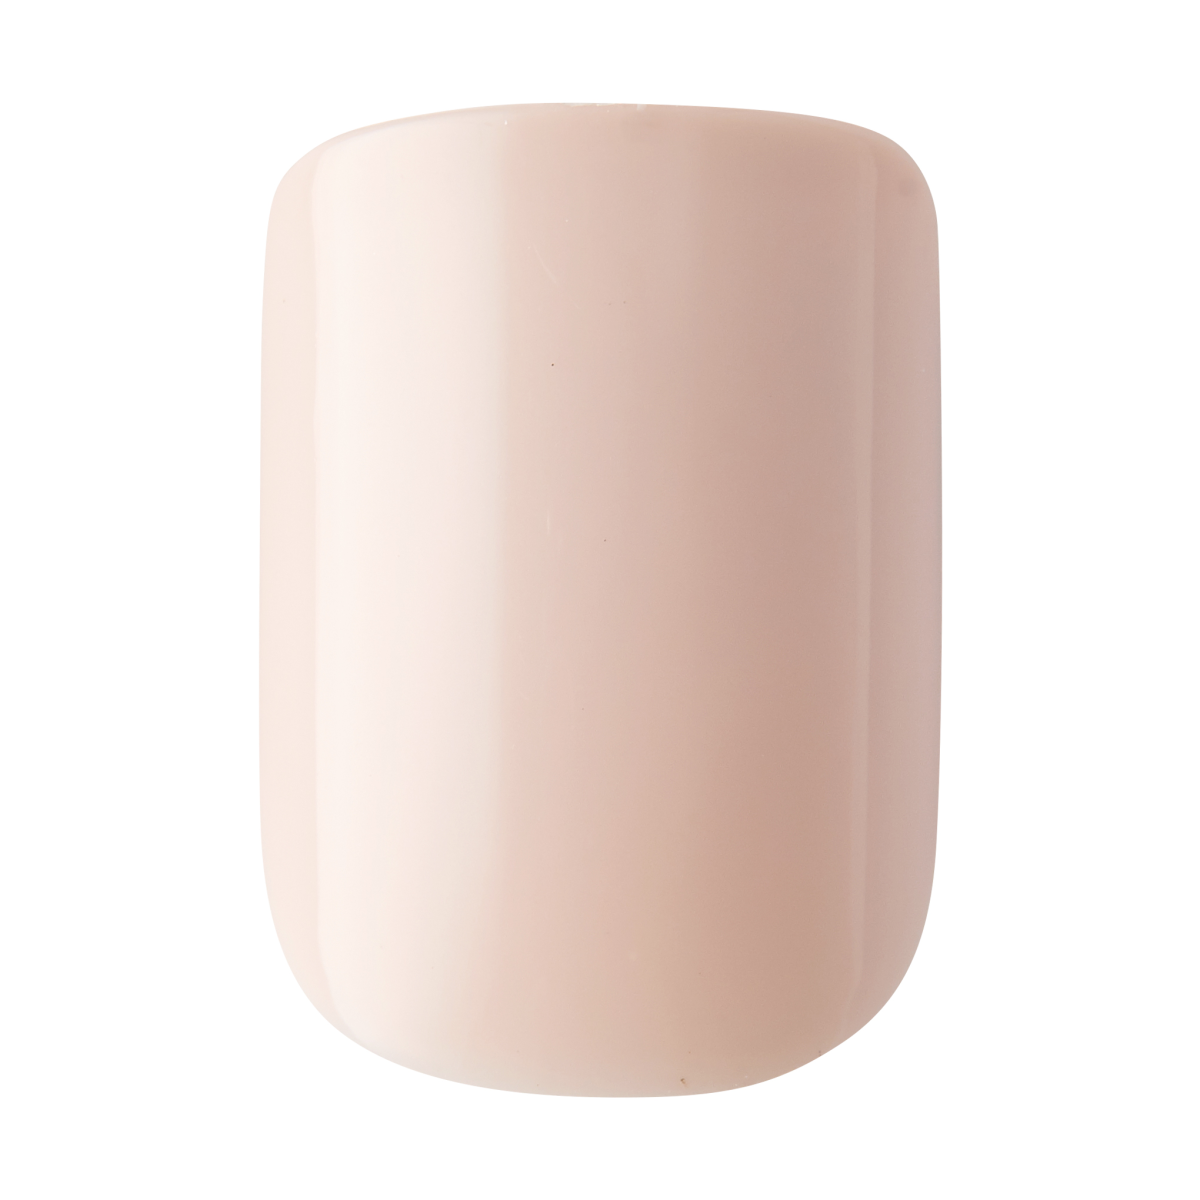 KISS Gel Fantasy, Press-On Nails, Here I Am, Beige, Short Squoval, 28ct